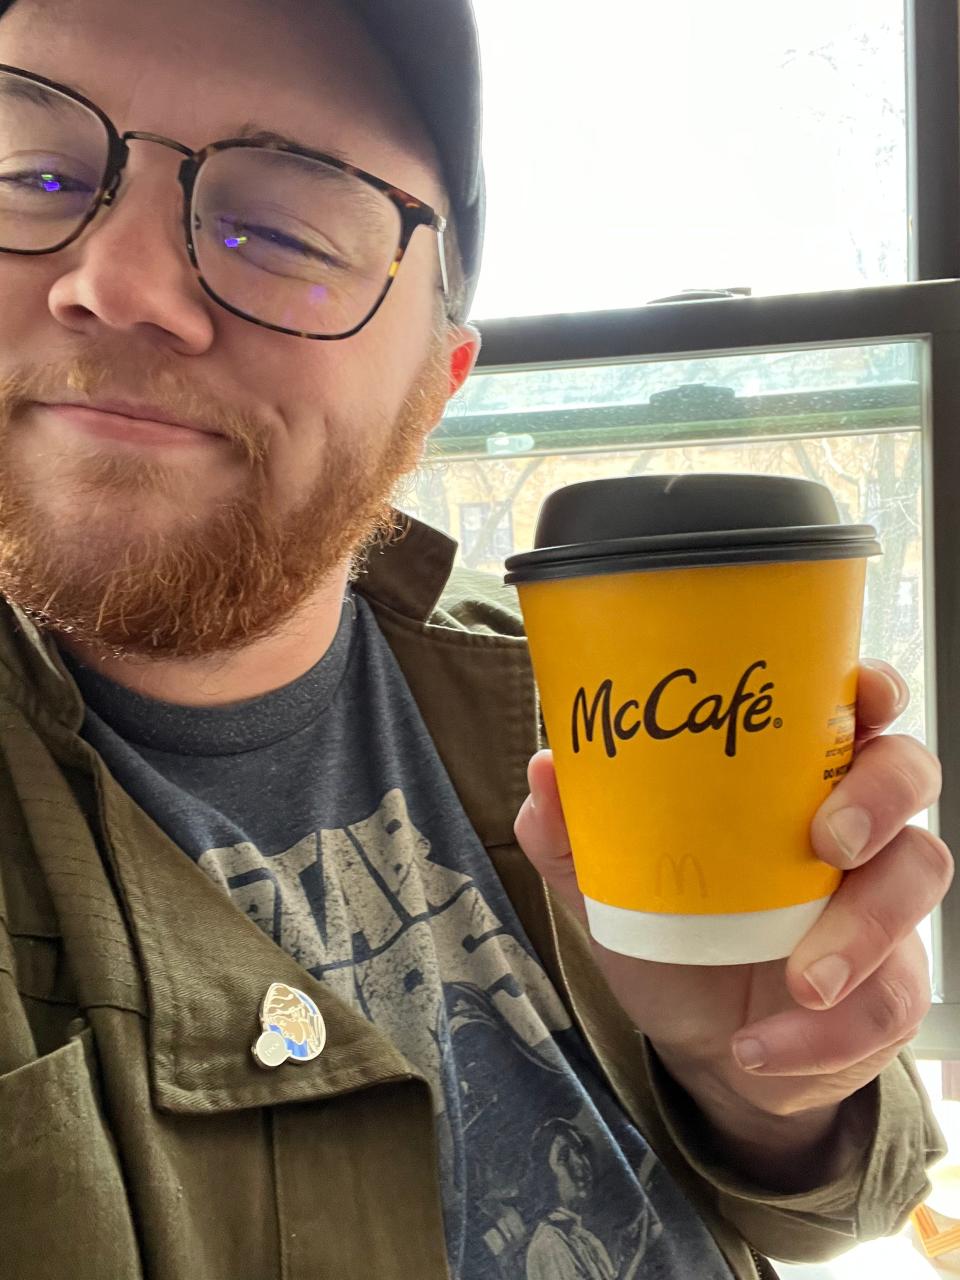 dylan holding a cup of mcdonalds coffee